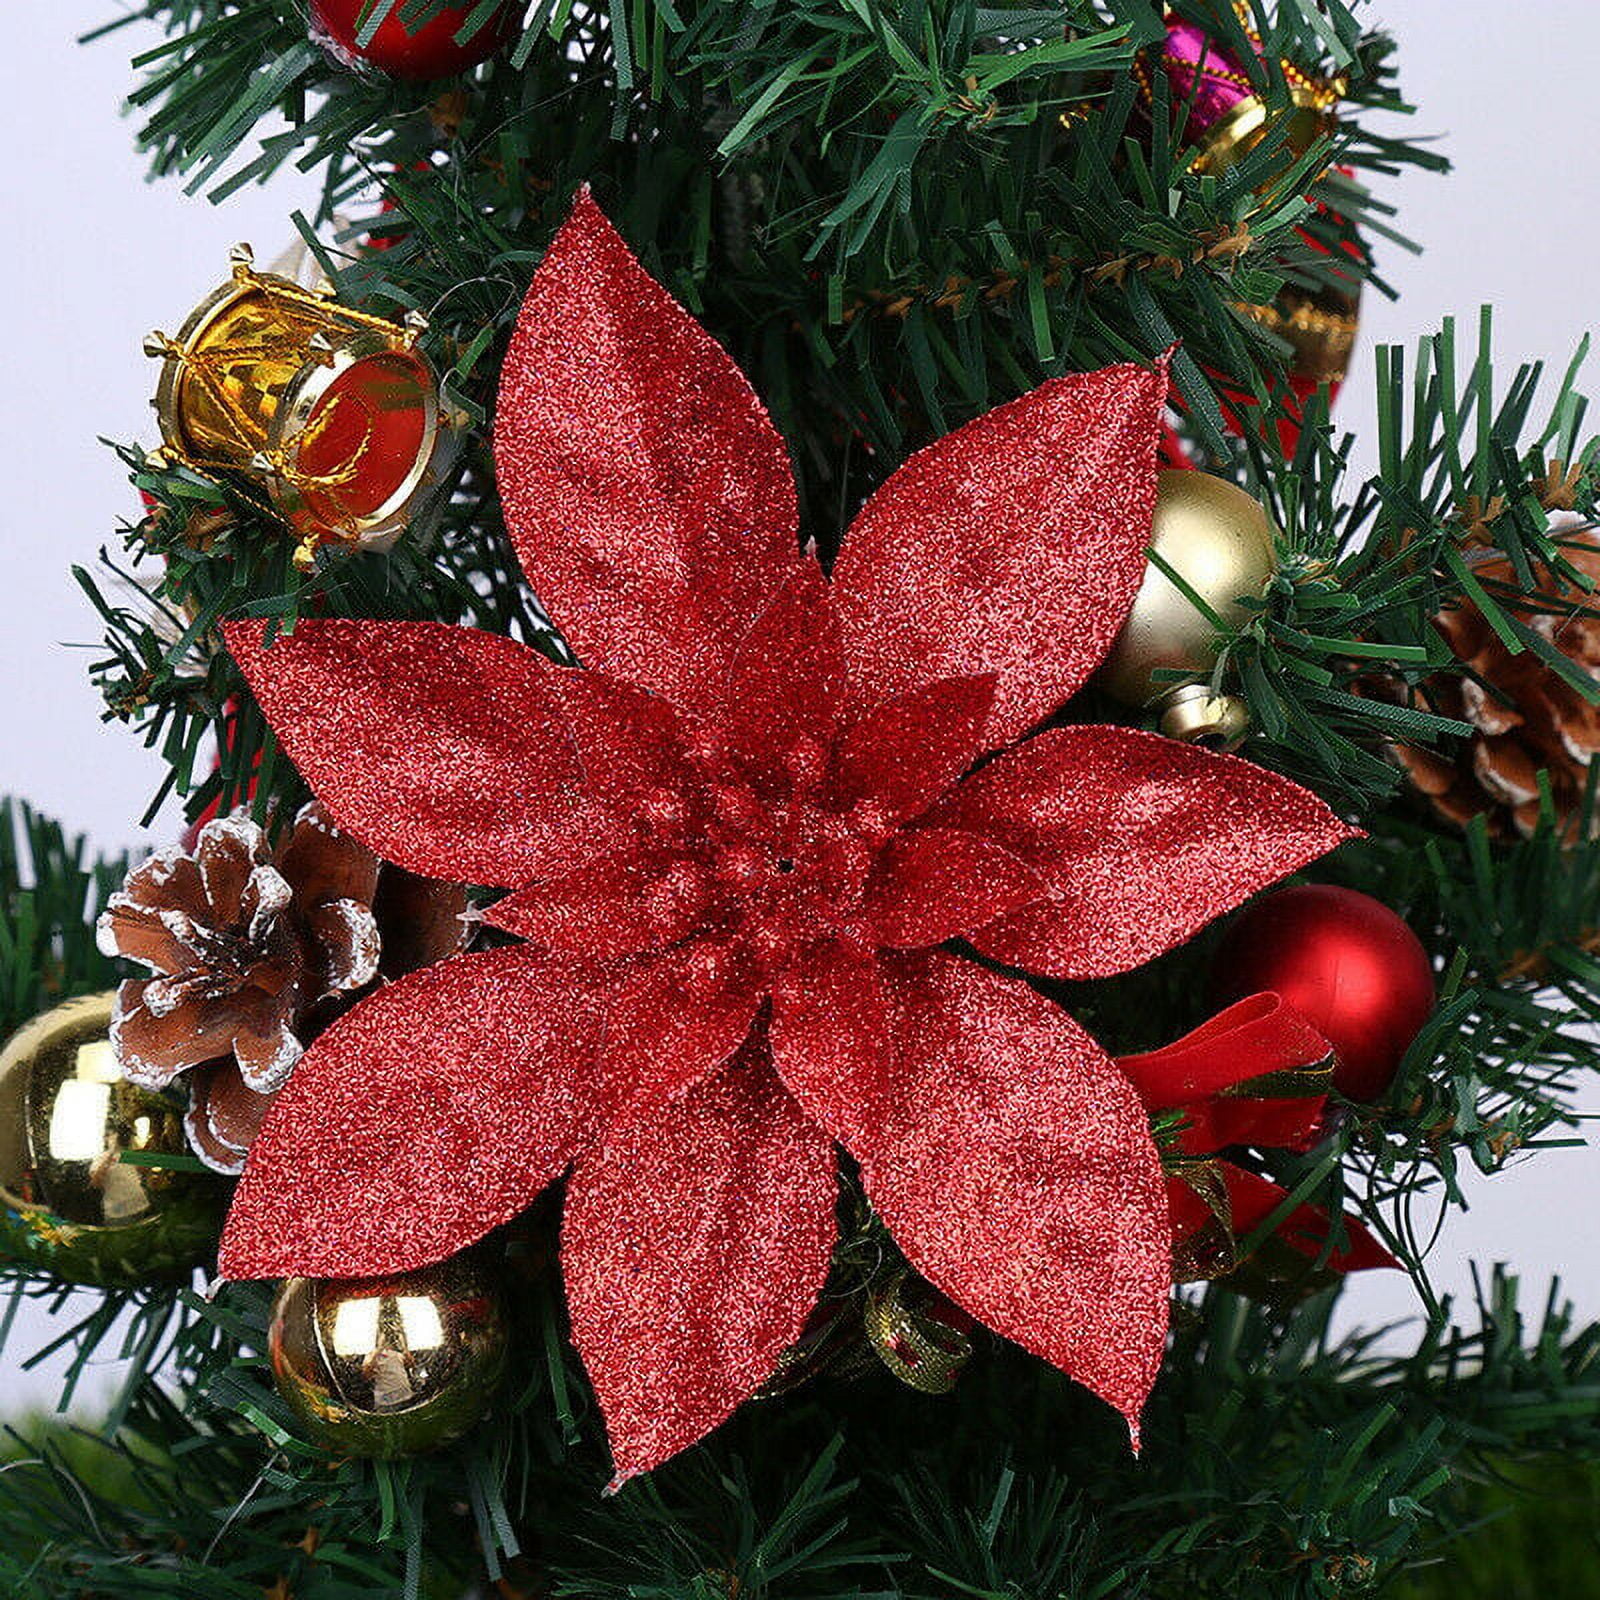 HAOSHICS 25 Pcs Poinsettias Artificial Christmas Flowers  Decorations,Glitter Poinsettia Flowers for Wedding Home Christmas Tree  Ornaments with